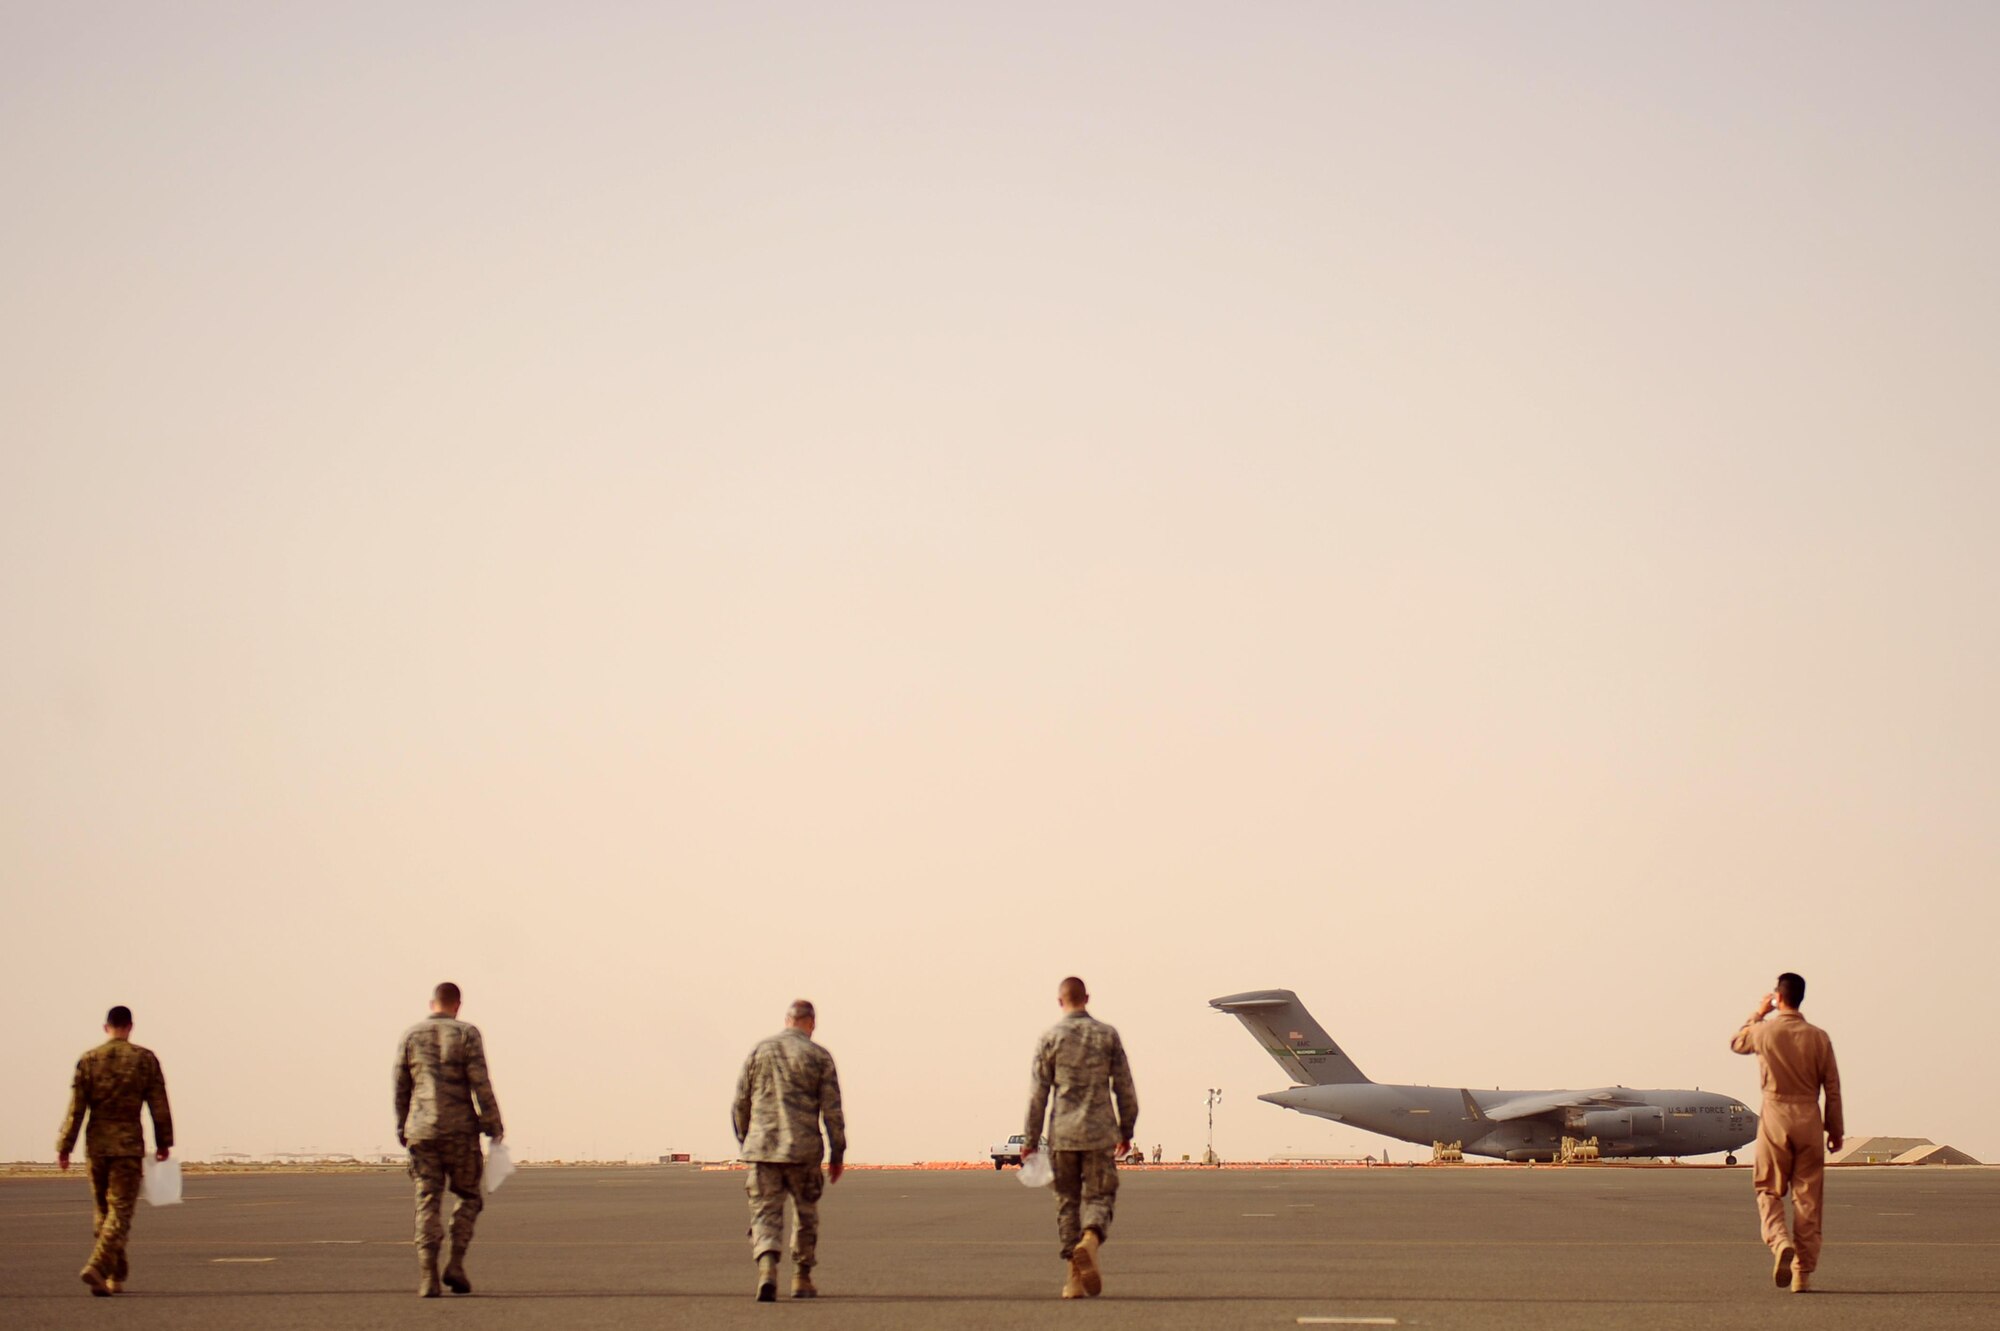 U.S. Airmen of the 386th Air Expeditionary Wing pick up trash on the flightline during a Foreign Object Debris Walk or “FOD Walk” at an undisclosed location in Southwest Asia, May 15, 2015. Airmen routinely clean the flightline to prevent aircraft from ingesting foreign debris that can cause engine or structural damage. (U.S. Air Force photo/Tech. Sgt. Brittany E. Jones)